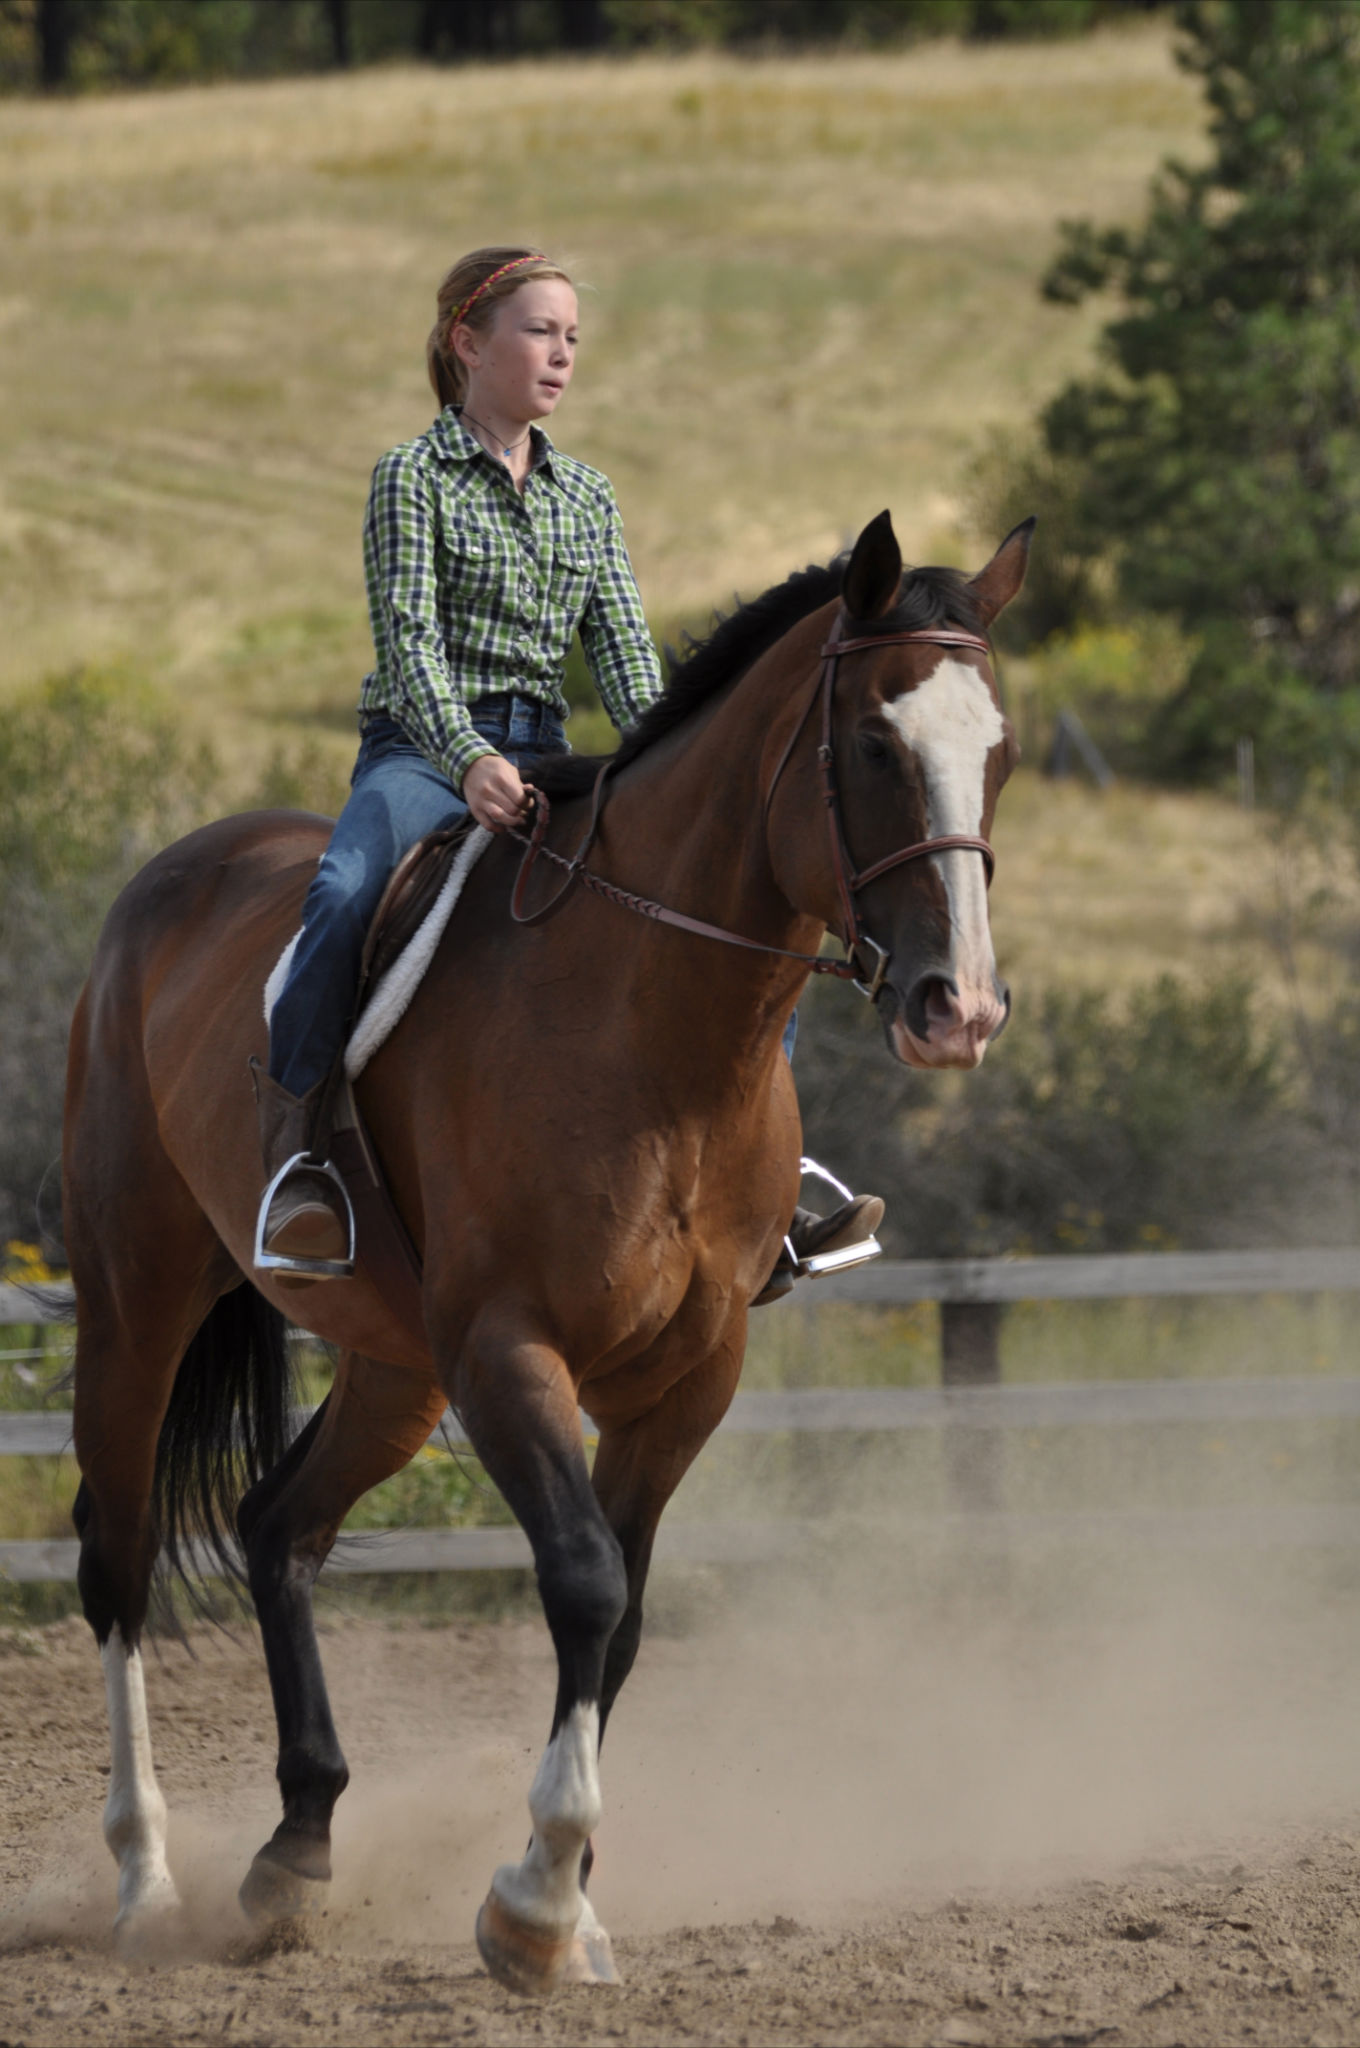 Jory Chittended practicing and equitation pattern on her horse, Shawnee